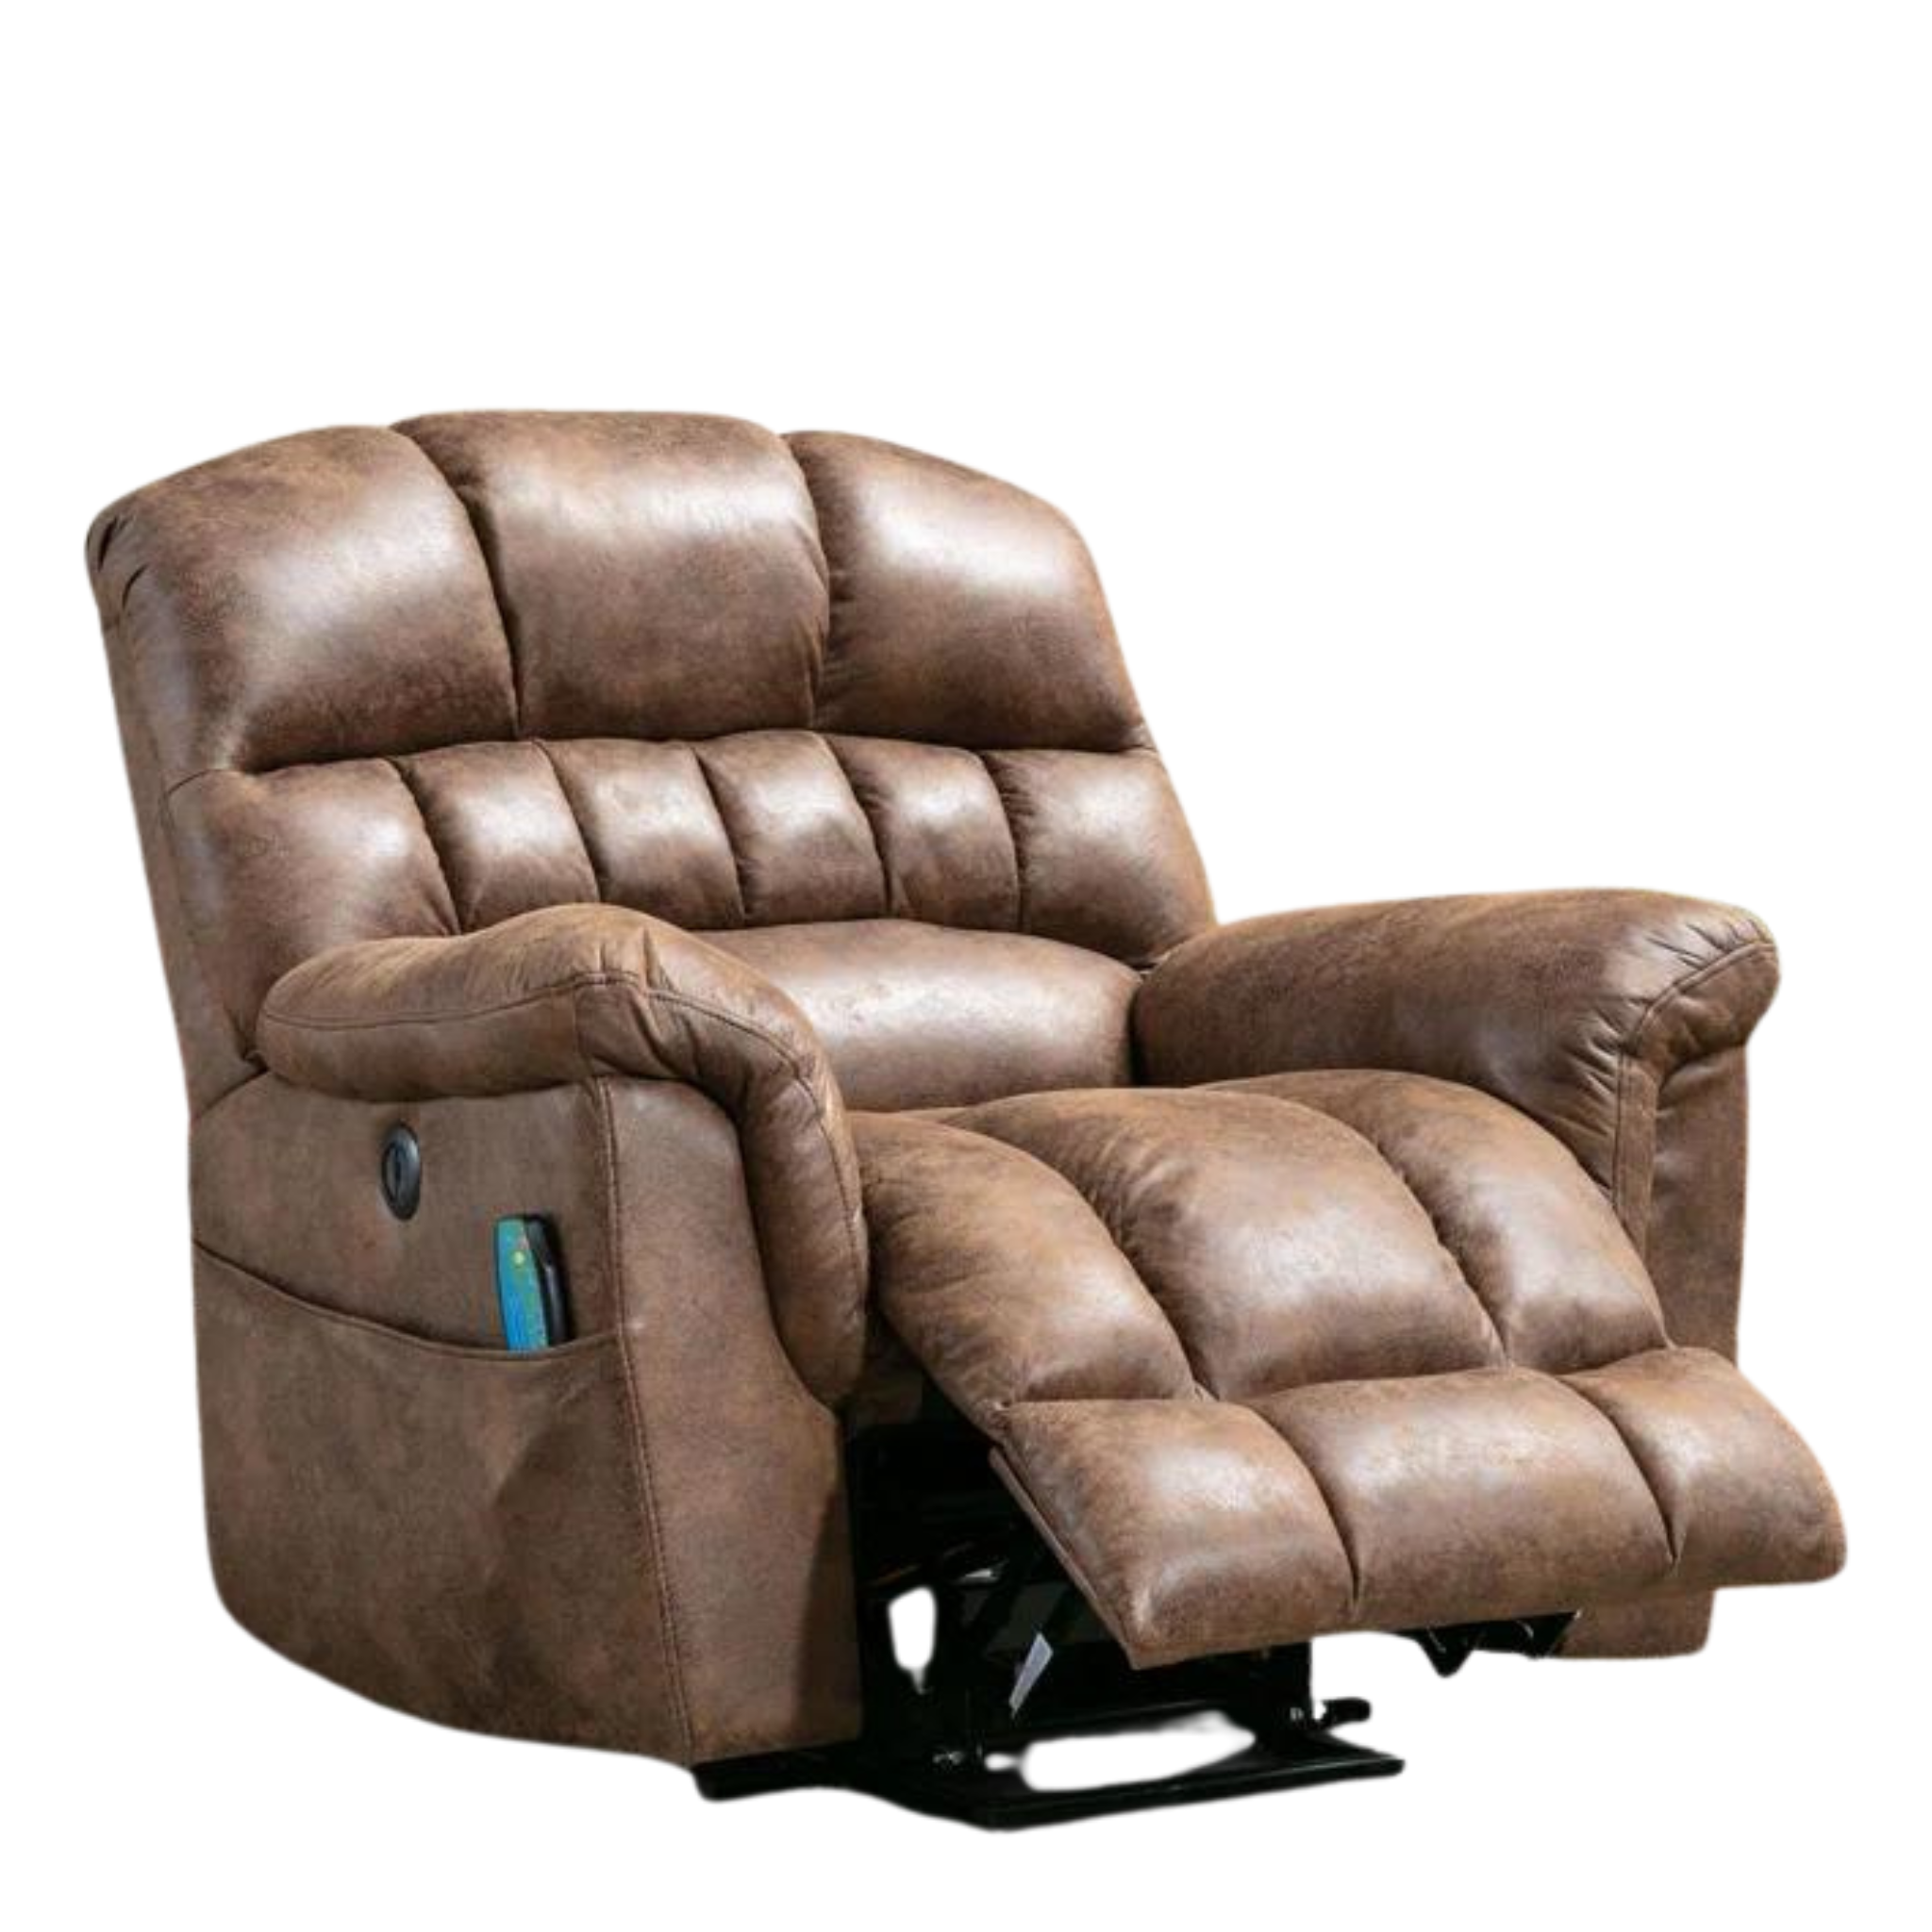 Extra Large Microfiber Power Reclining Heated Massage Chair